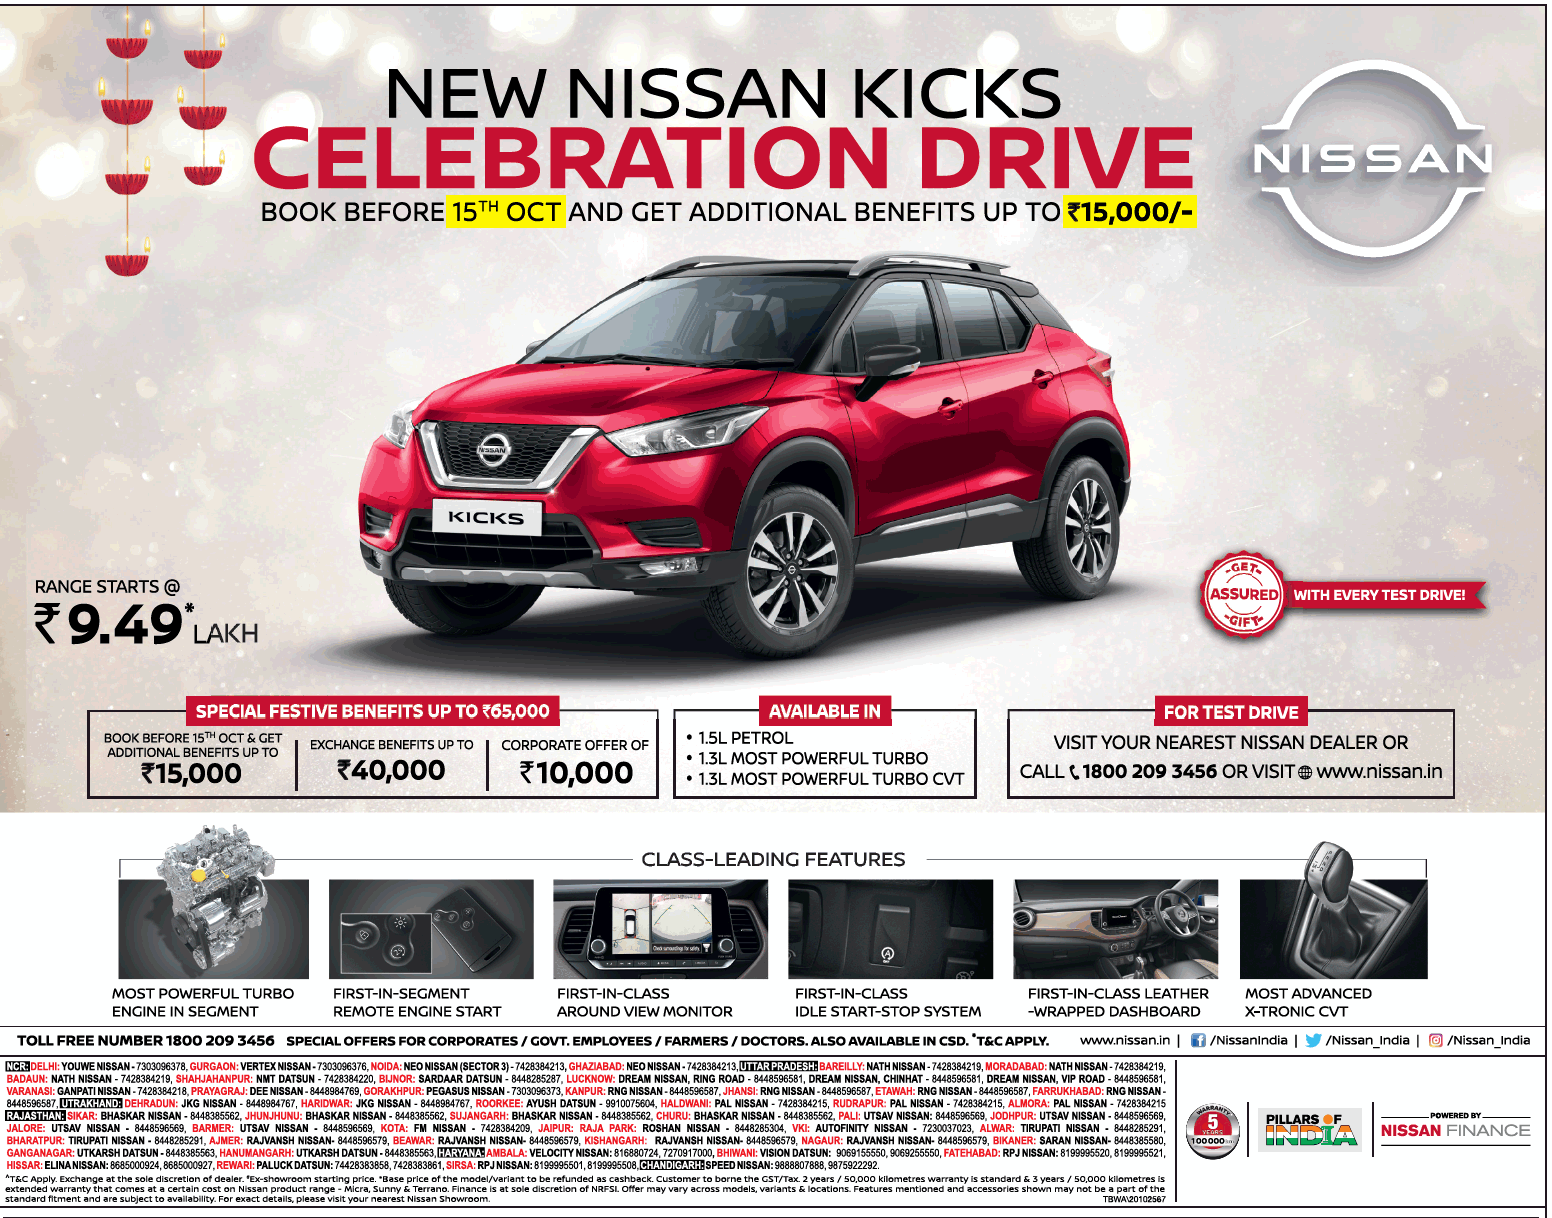 nissan-kicks-book-before-15th-oct-and-get-additional-benefits-ad-delhi-times-11-10-2020